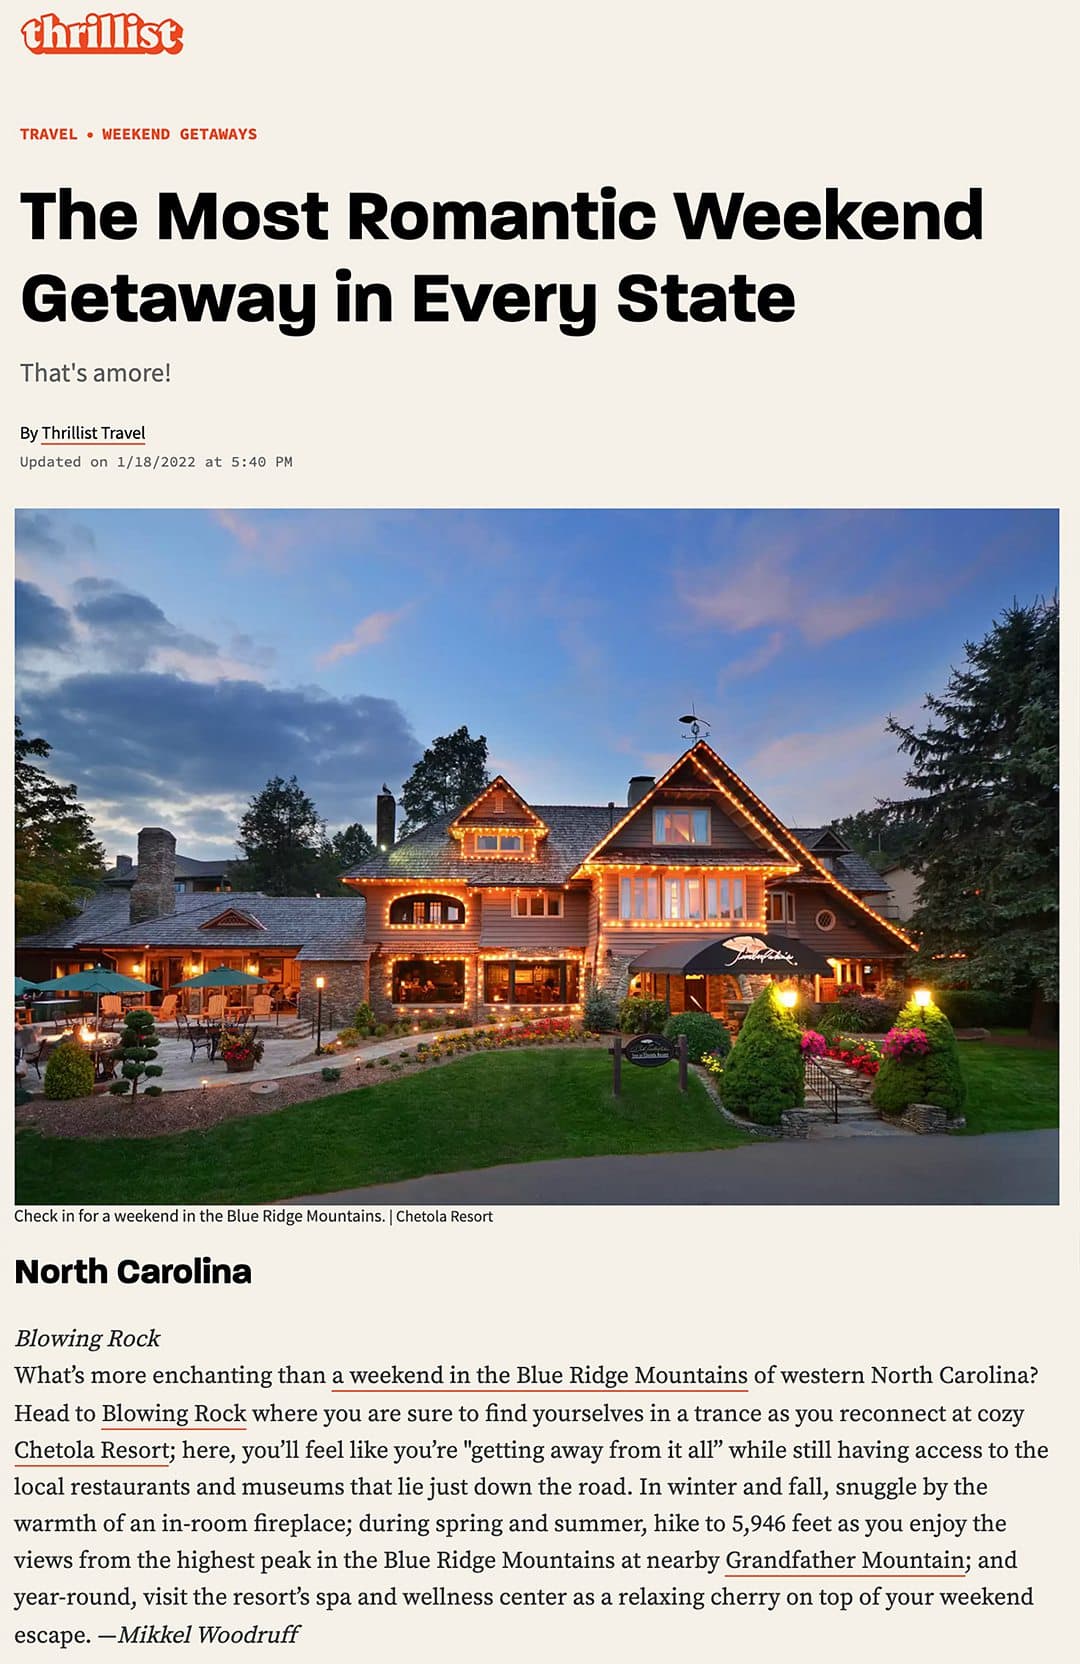 Thrillist article screen capture for the Most Romantic Weekend Getaways in Every State.